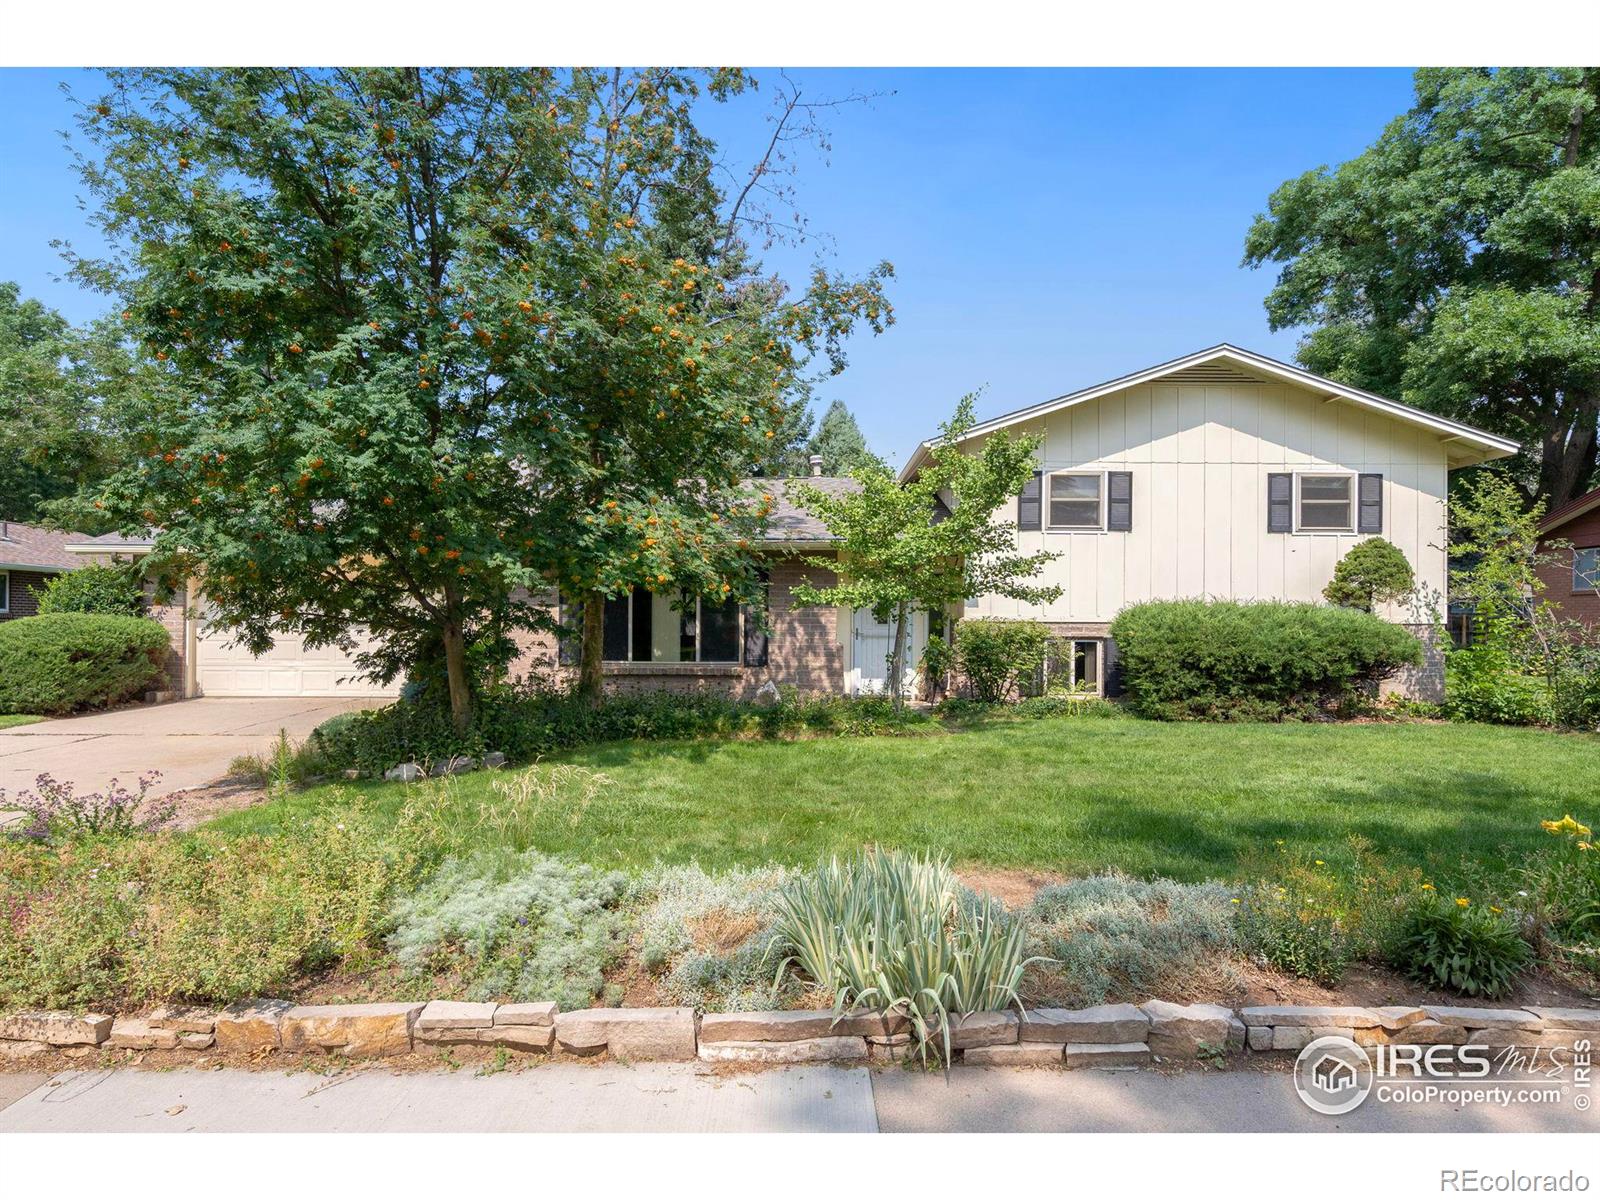 1317  Lory Street, fort collins MLS: 4567891014757 Beds: 4 Baths: 2 Price: $600,000